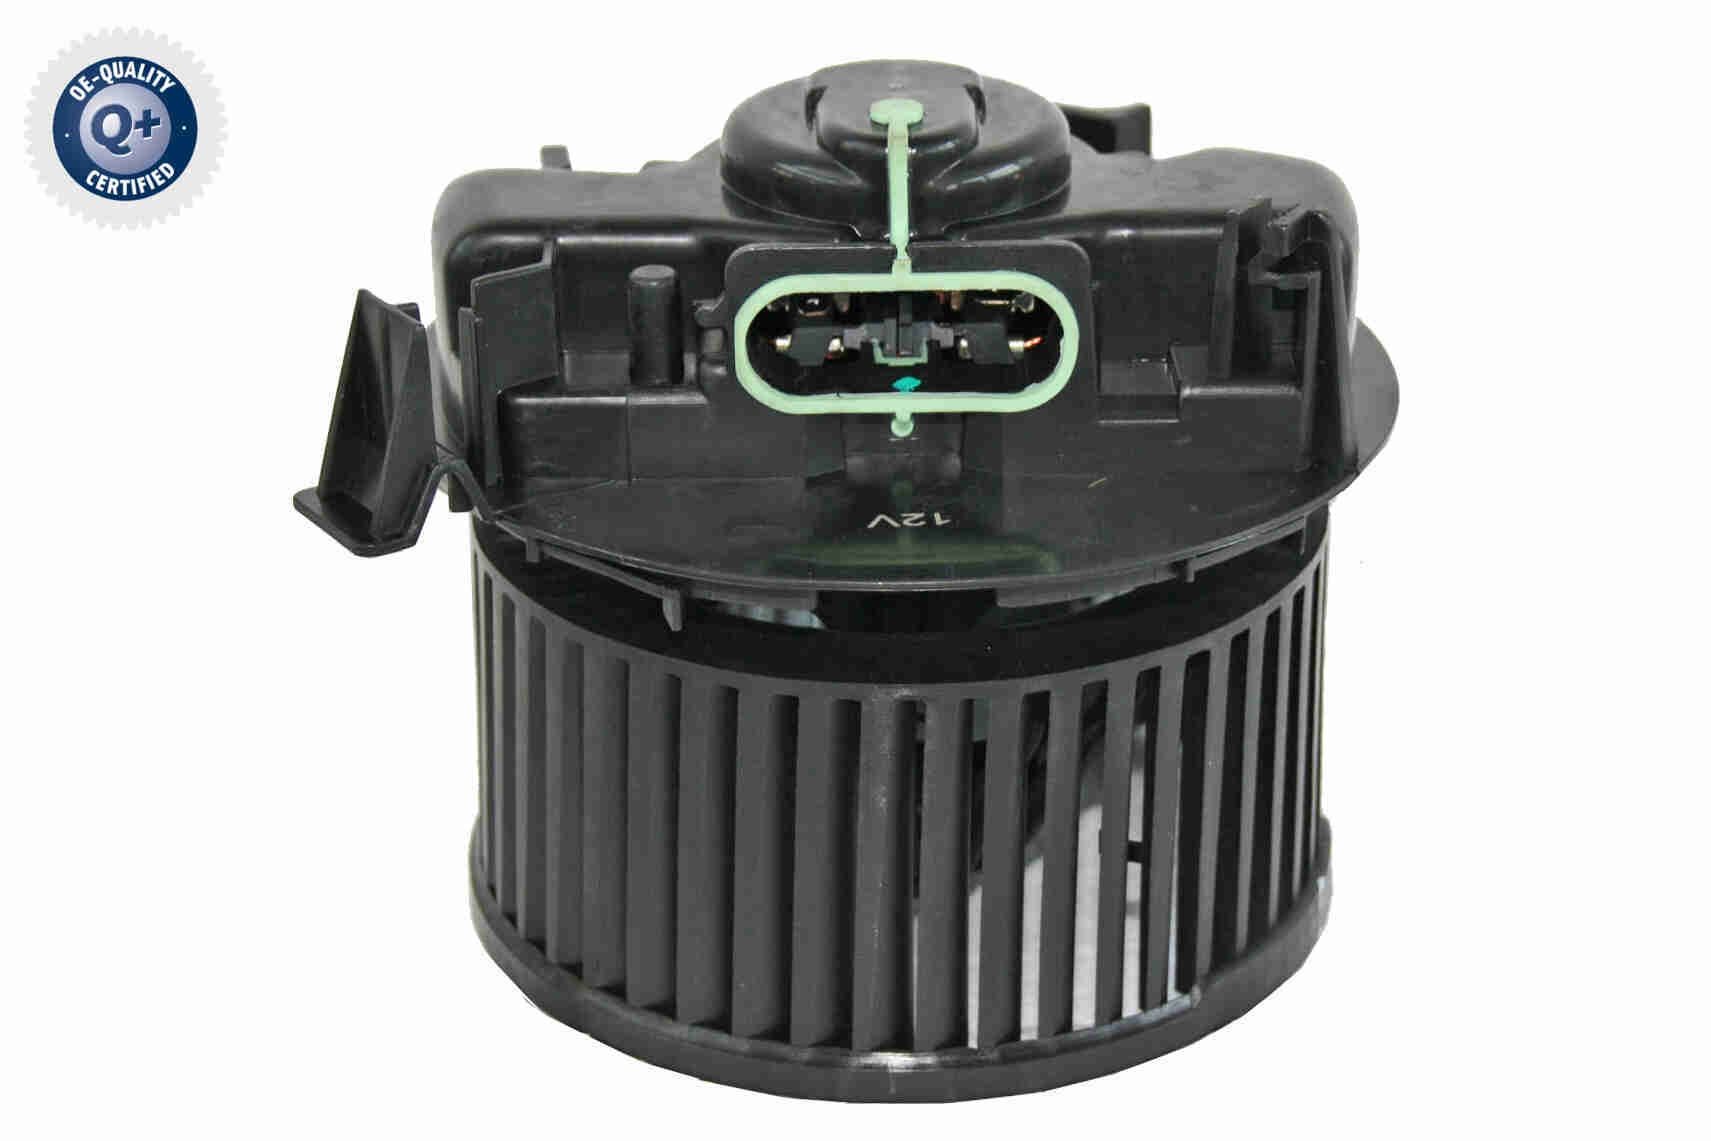 VEMO V46-03-1390 Interior Blower Q+, original equipment manufacturer quality, for vehicles with automatic climate control